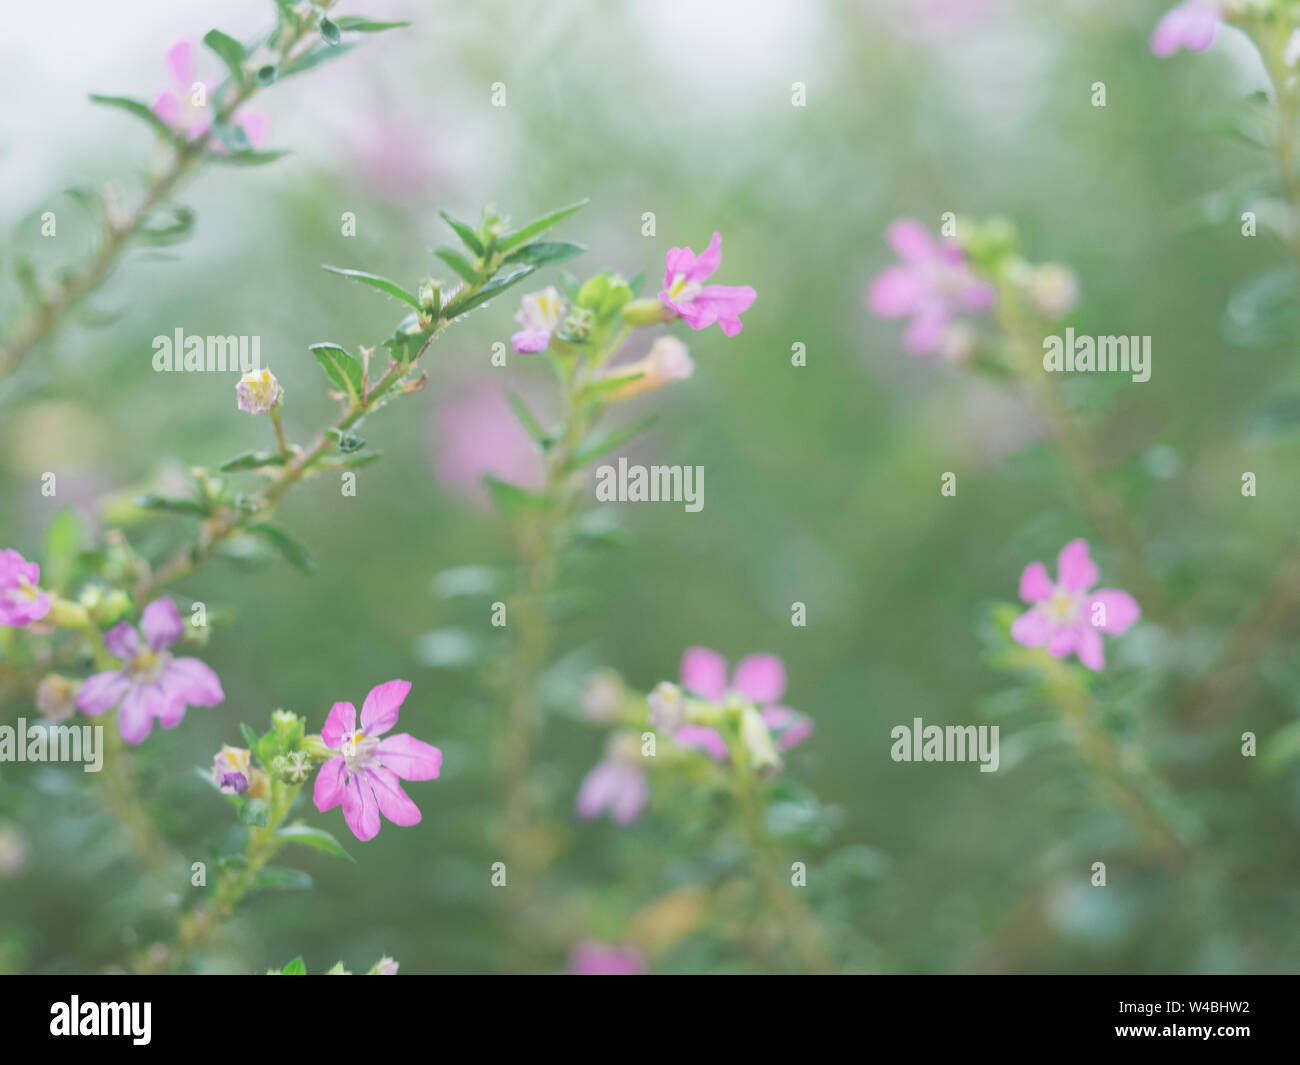 Small purple flowers on a blurred background (Cuphea hyssopifolia Kunth) Stock Photo